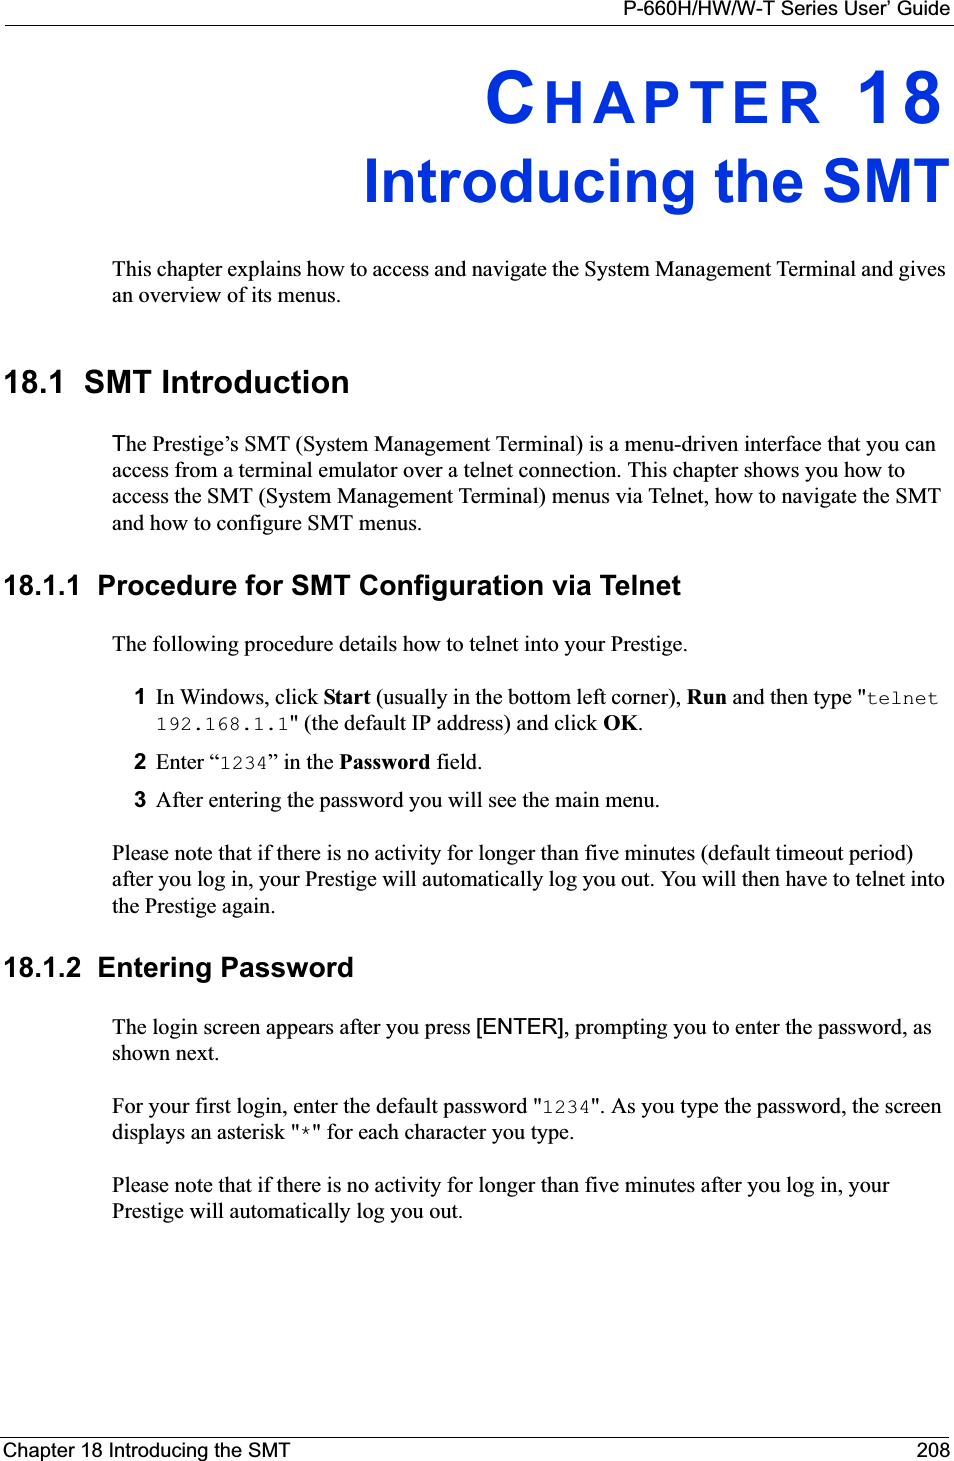 P-660H/HW/W-T Series User’ GuideChapter 18 Introducing the SMT 208CHAPTER 18Introducing the SMTThis chapter explains how to access and navigate the System Management Terminal and gives an overview of its menus.18.1  SMT IntroductionThe Prestige’s SMT (System Management Terminal) is a menu-driven interface that you can access from a terminal emulator over a telnet connection. This chapter shows you how to access the SMT (System Management Terminal) menus via Telnet, how to navigate the SMT and how to configure SMT menus.18.1.1  Procedure for SMT Configuration via TelnetThe following procedure details how to telnet into your Prestige.1In Windows, click Start (usually in the bottom left corner), Run and then type &quot;telnet192.168.1.1&quot; (the default IP address) and click OK.2Enter “1234” in the Password field.3After entering the password you will see the main menu.Please note that if there is no activity for longer than five minutes (default timeout period) after you log in, your Prestige will automatically log you out. You will then have to telnet into the Prestige again.18.1.2  Entering PasswordThe login screen appears after you press [ENTER], prompting you to enter the password, as shown next.For your first login, enter the default password &quot;1234&quot;. As you type the password, the screen displays an asterisk &quot;*&quot; for each character you type.Please note that if there is no activity for longer than five minutes after you log in, your Prestige will automatically log you out. 